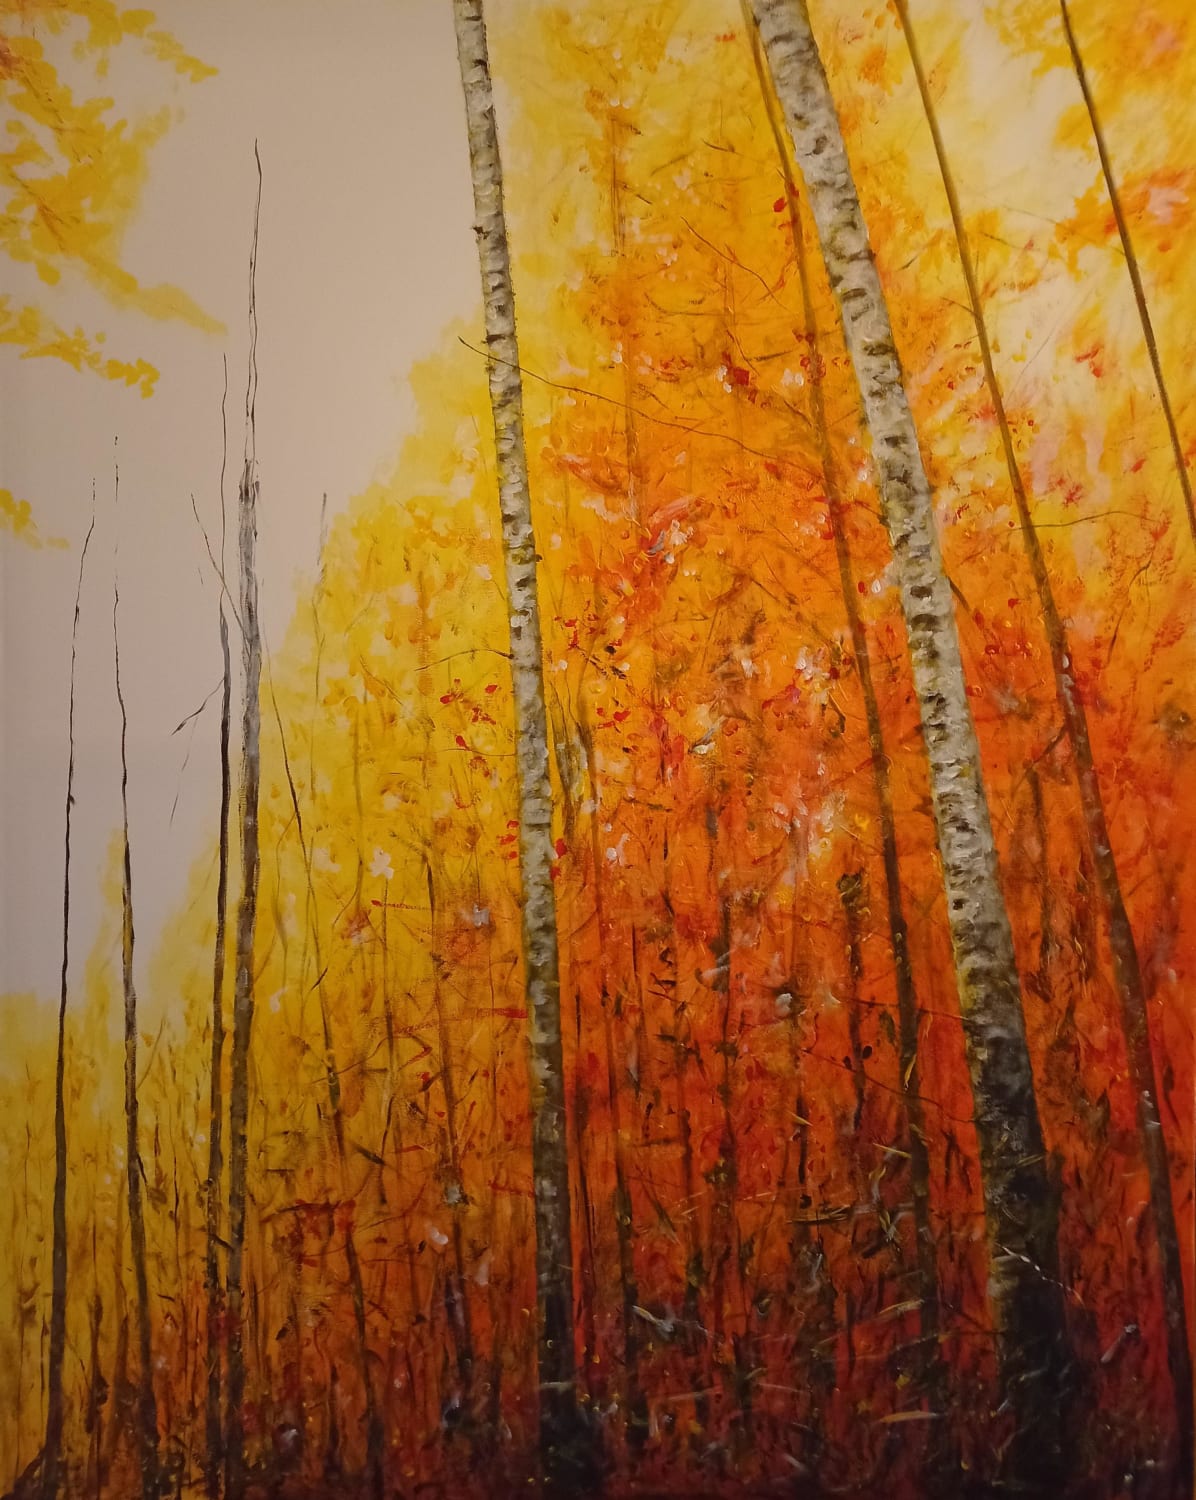 Acrylic painting by me cm). Autumn is coming...